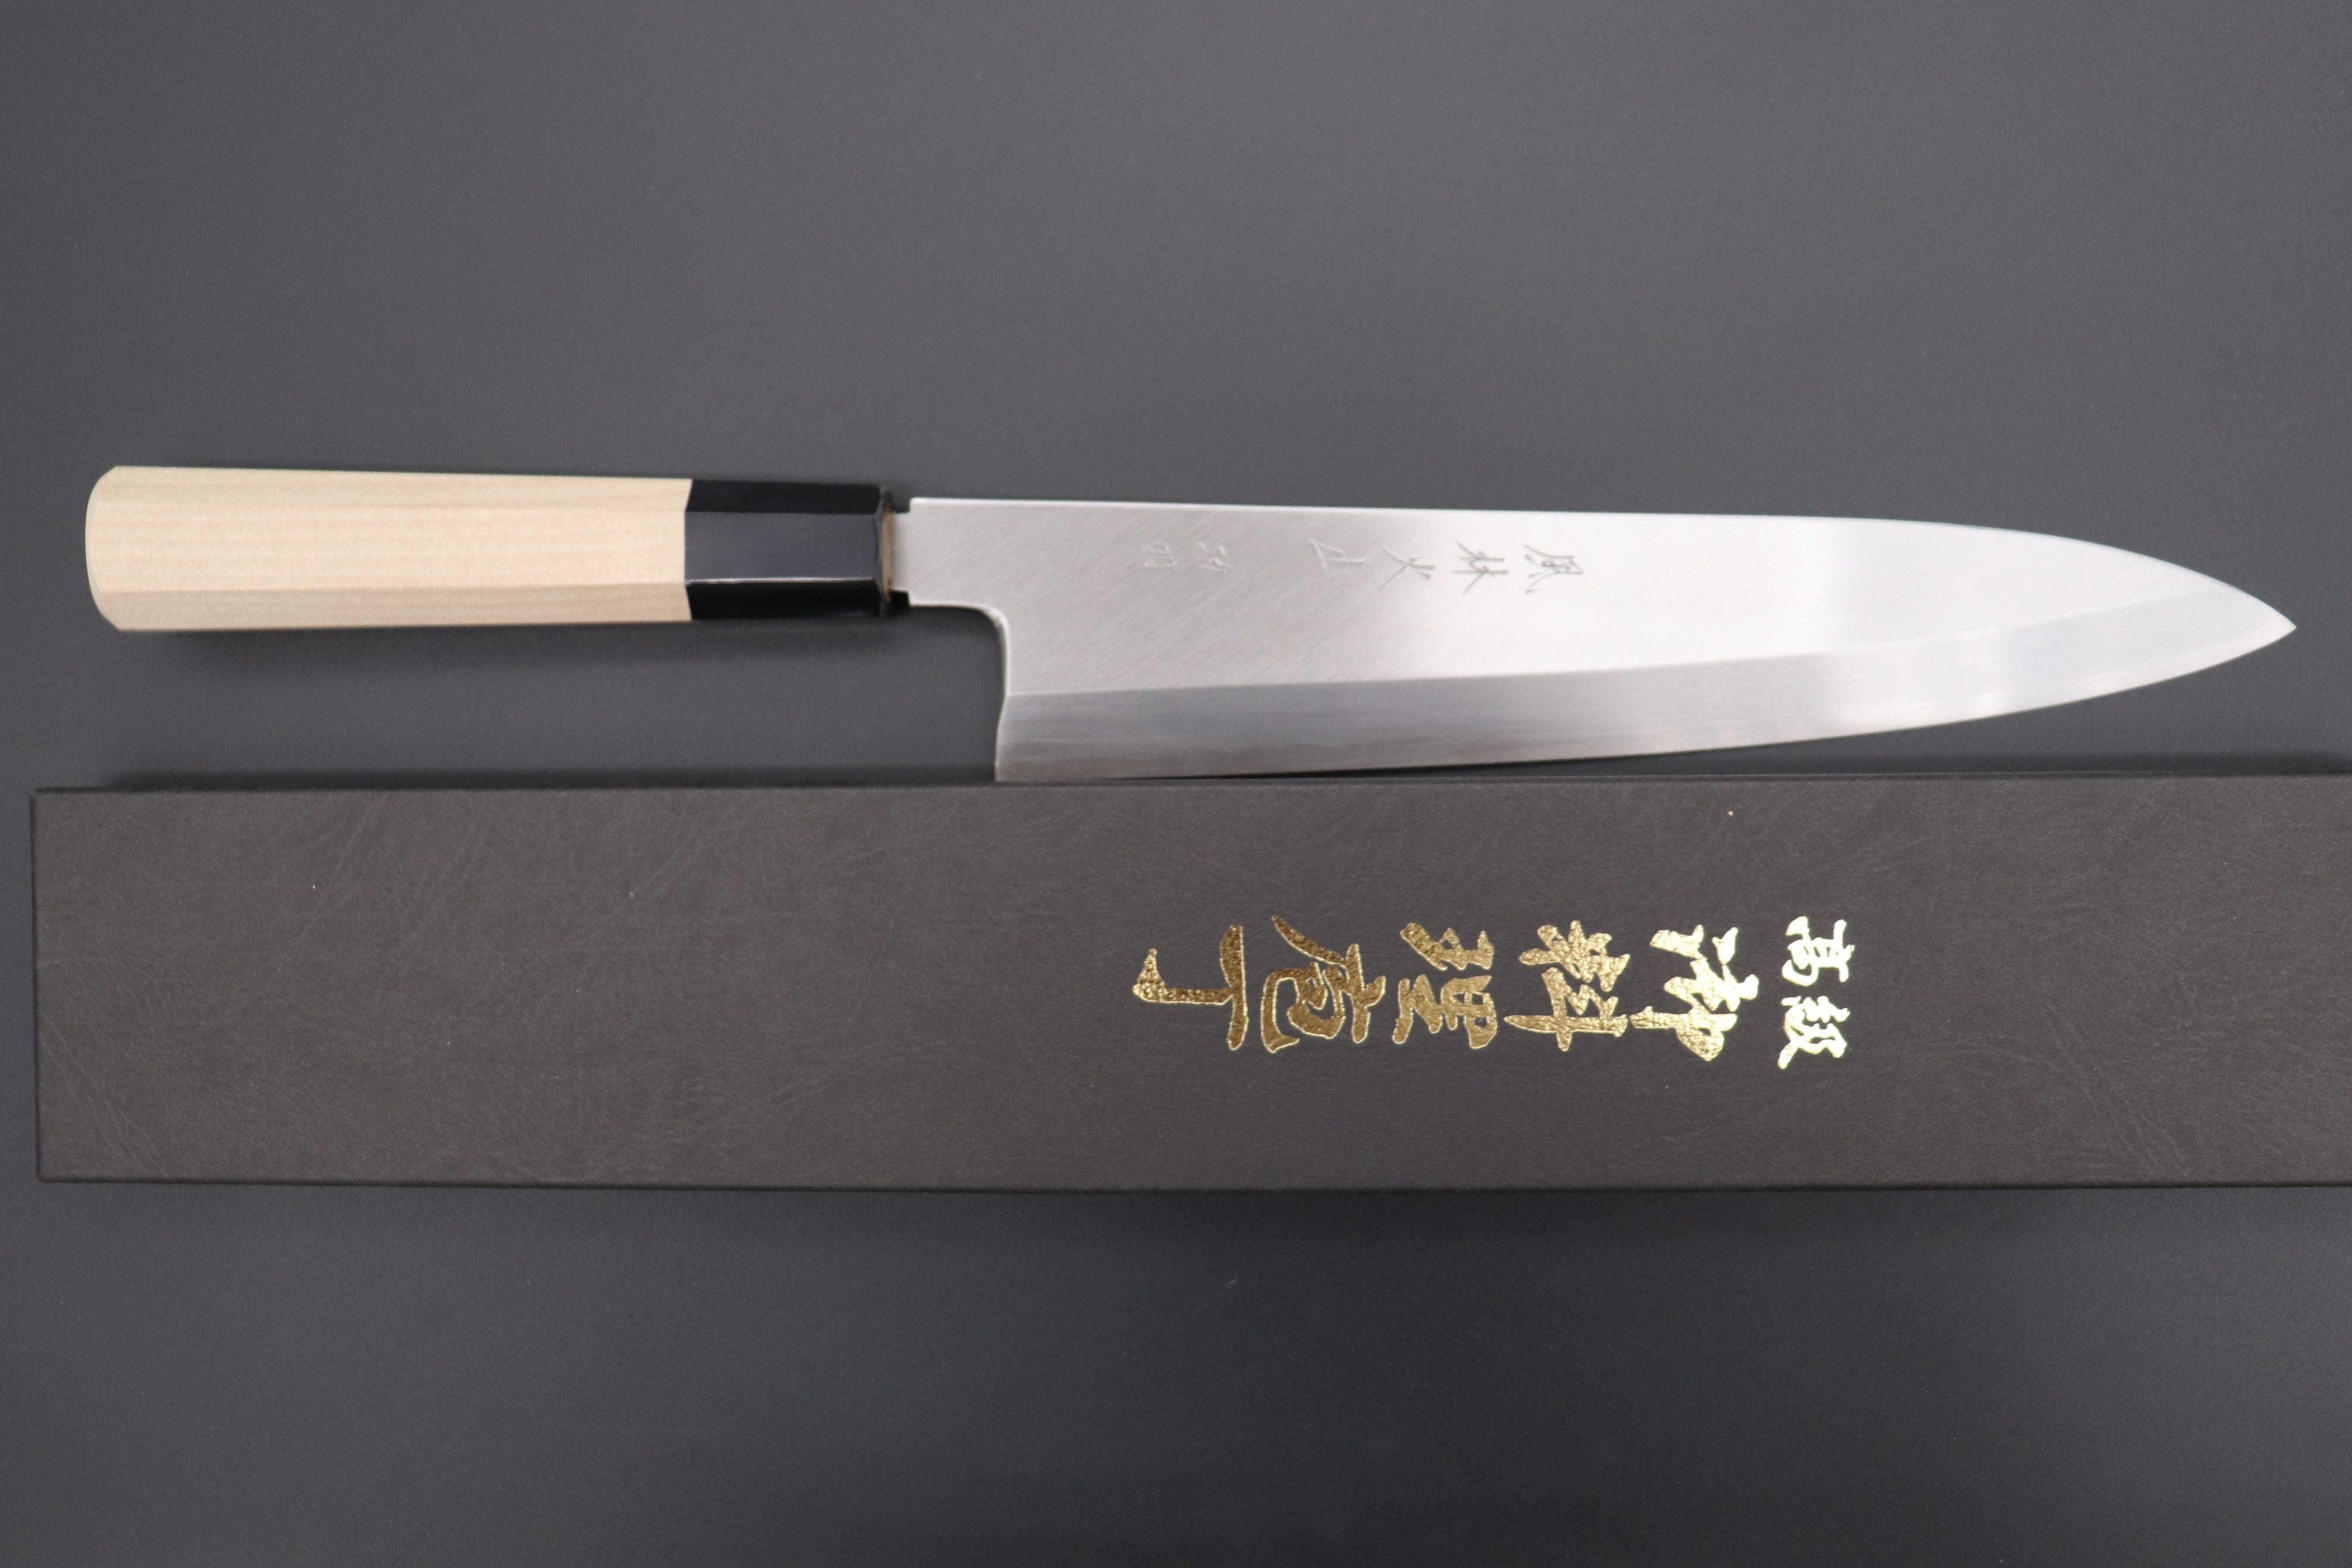 Understanding Single and Double Bevel Knives – Kamikoto